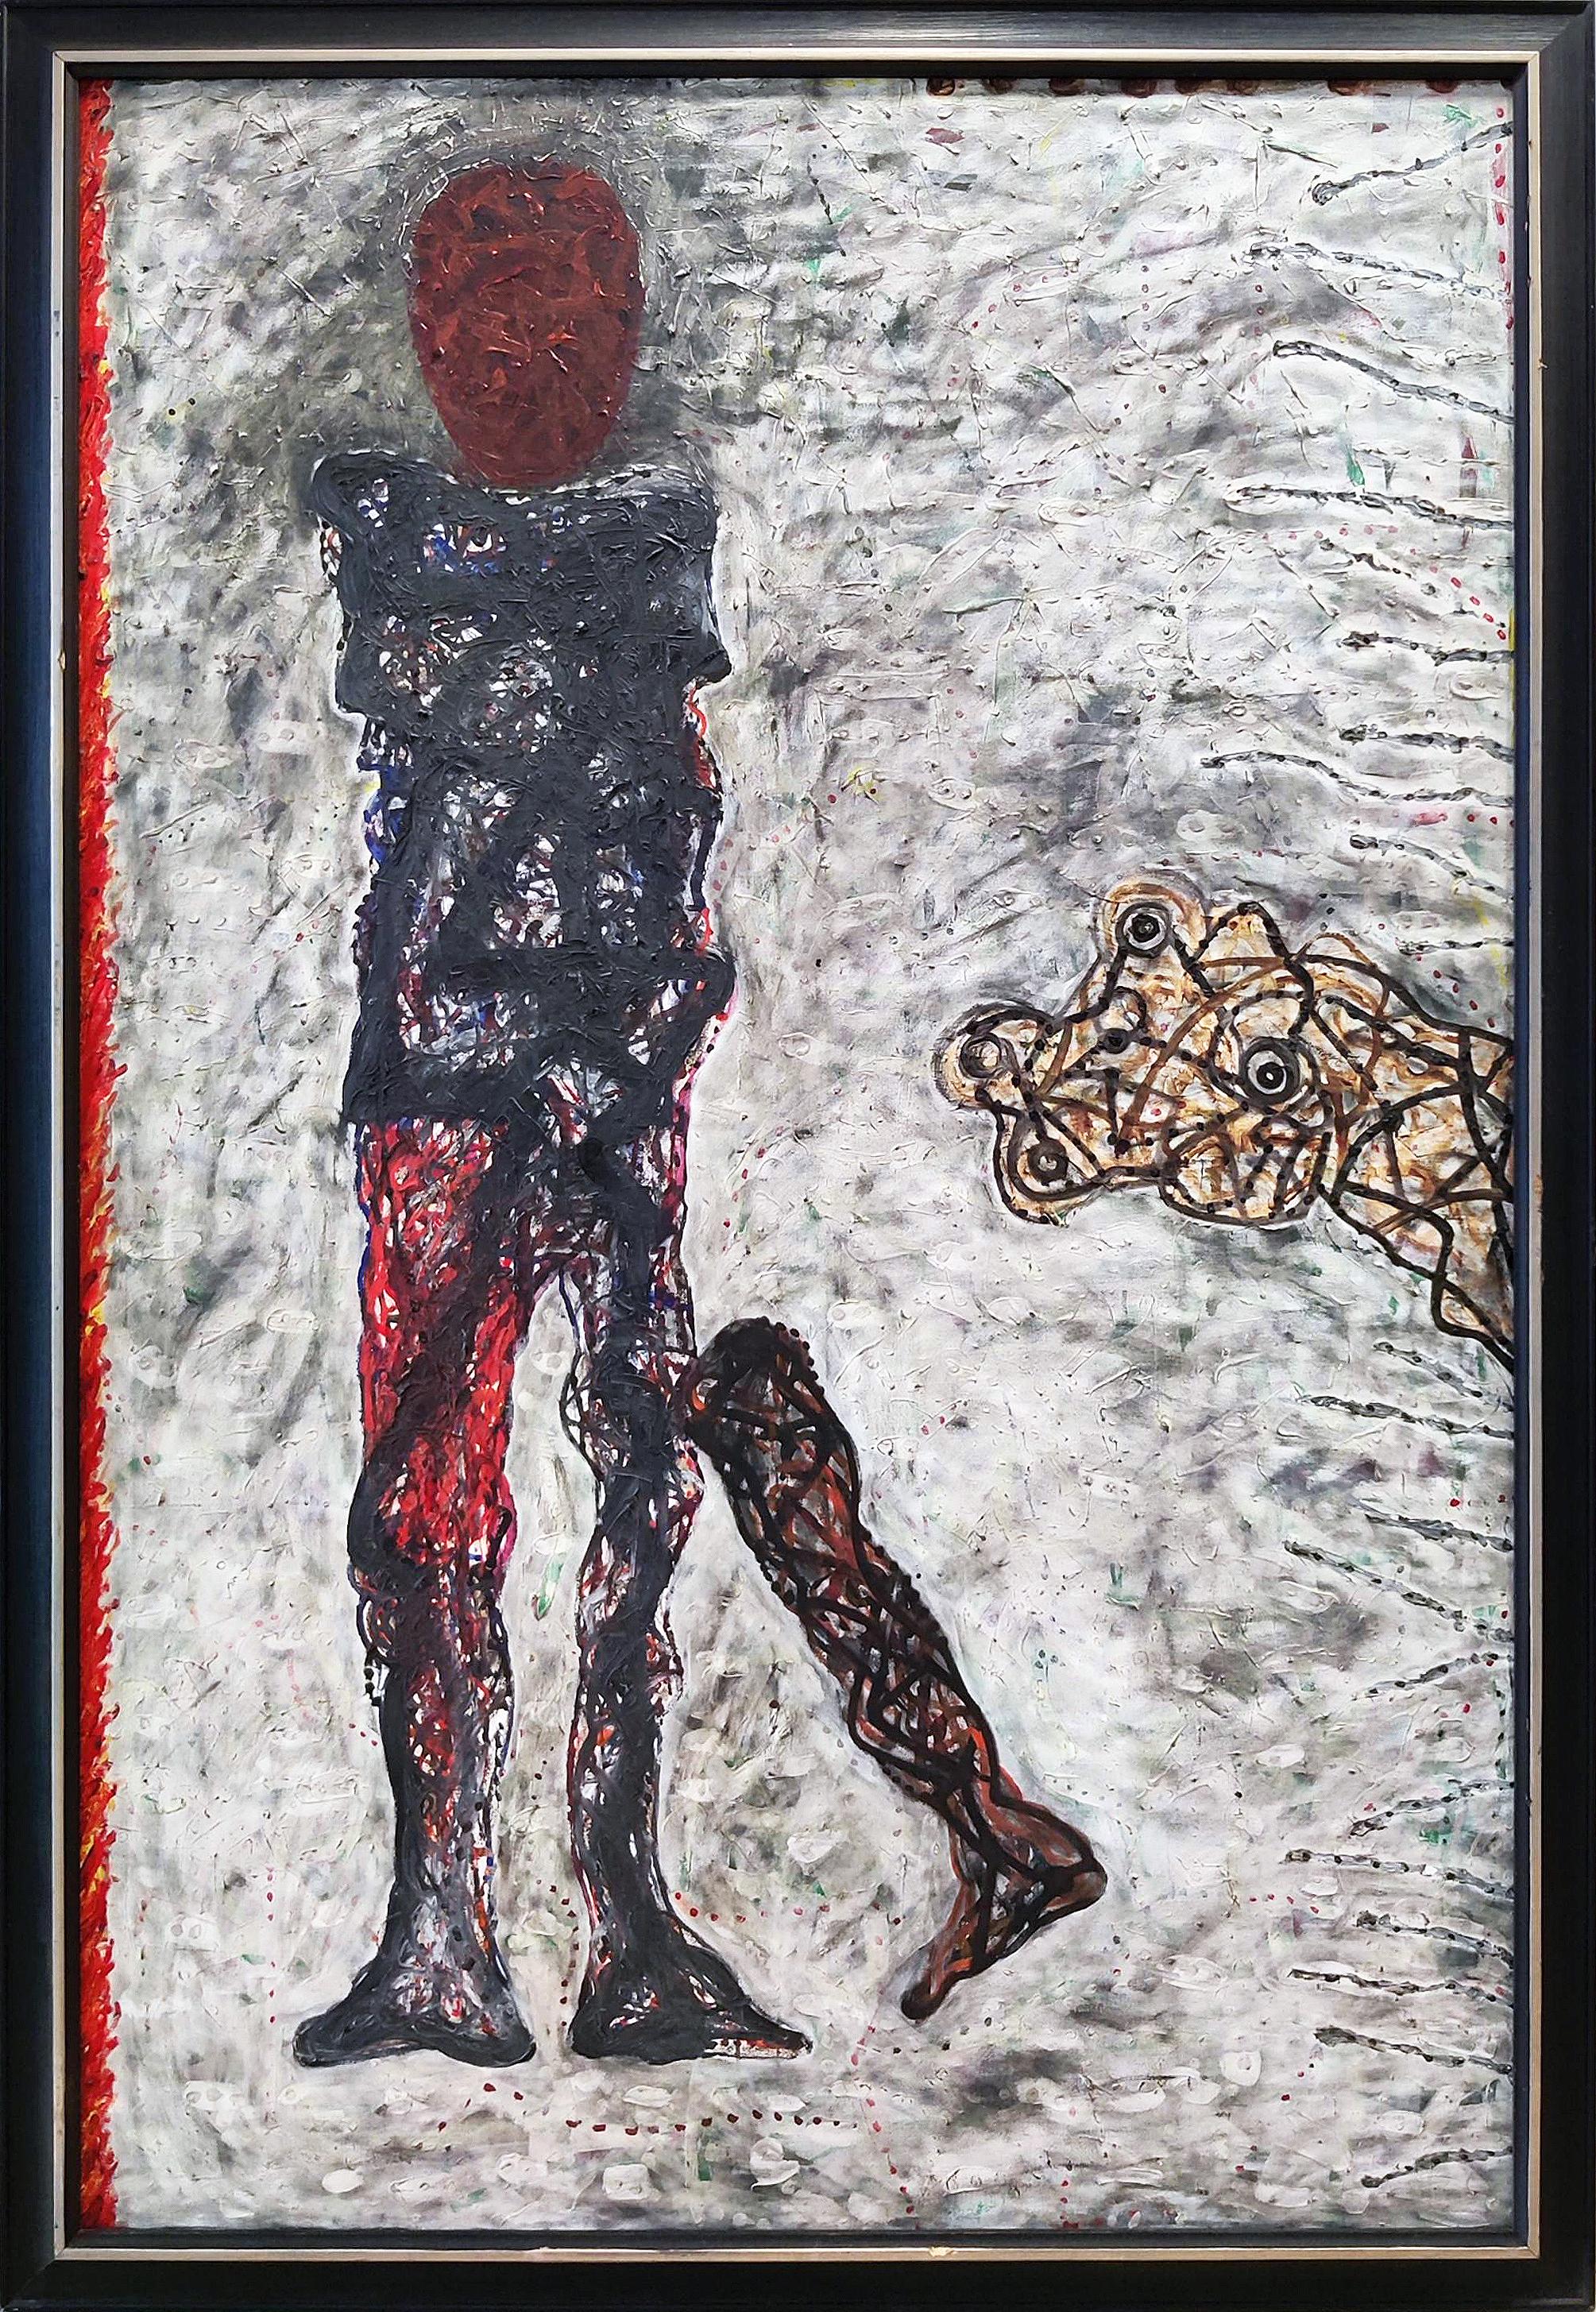 Abstract, Figurative, Acrylic on Canvas by Modern Indian Artist "In Stock"